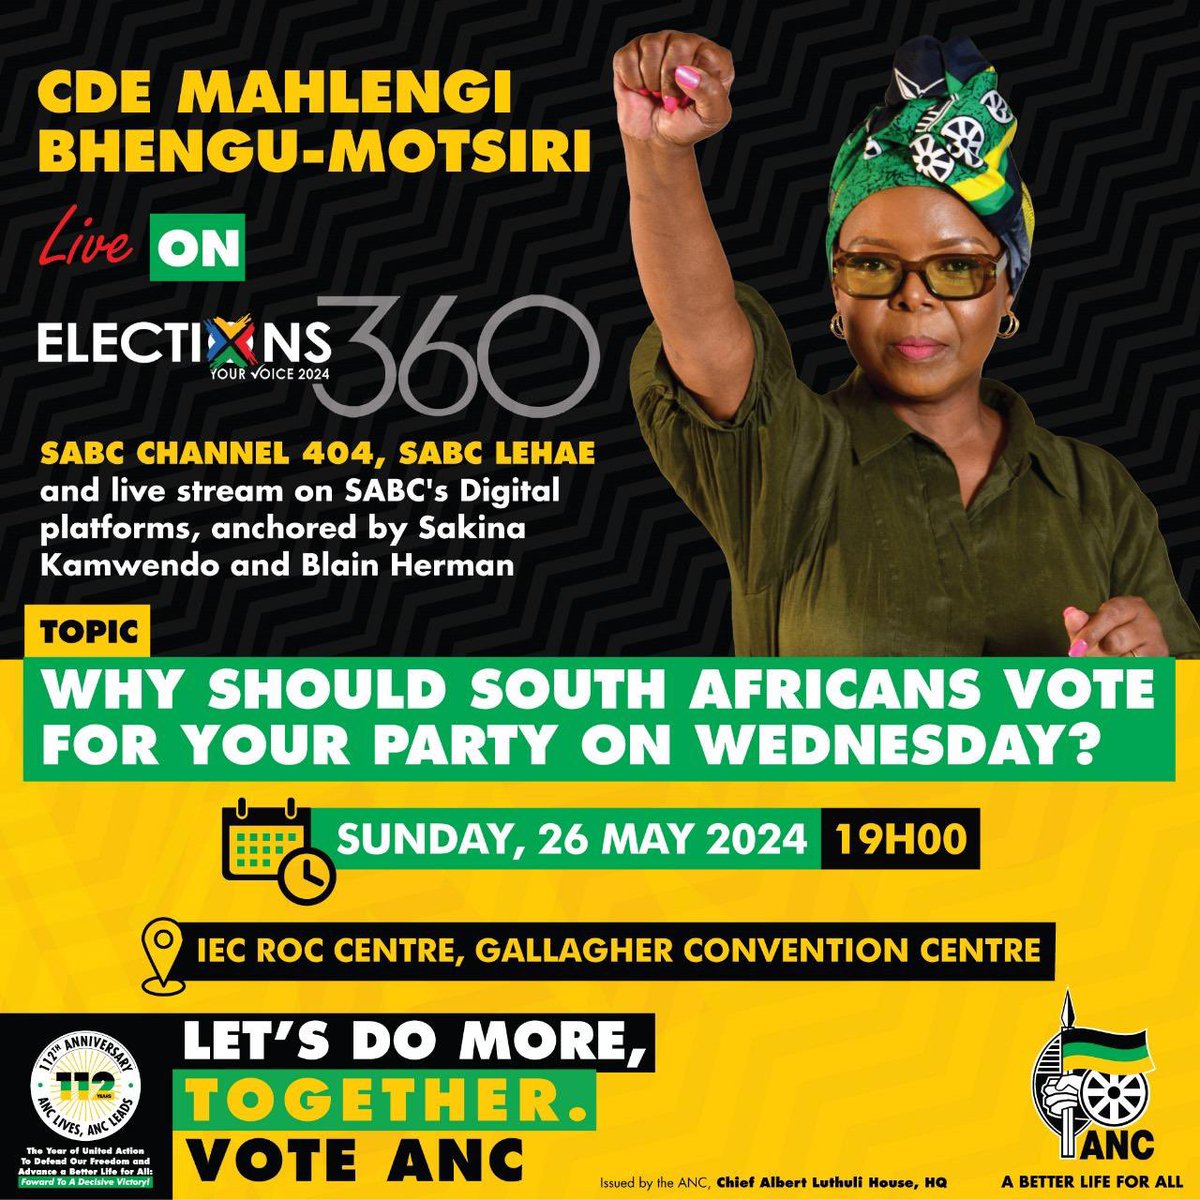 Today, our National Spokesperson, Comrade Mahlengi Bhengu-Motsiri will be live on Elections 360 at 19h00 on SABC Channel 404. Topic: Why should South Africans vote for your party on Wednesday, 29 May 2024? #VoteANC2024 #LetsDoMoreTogether